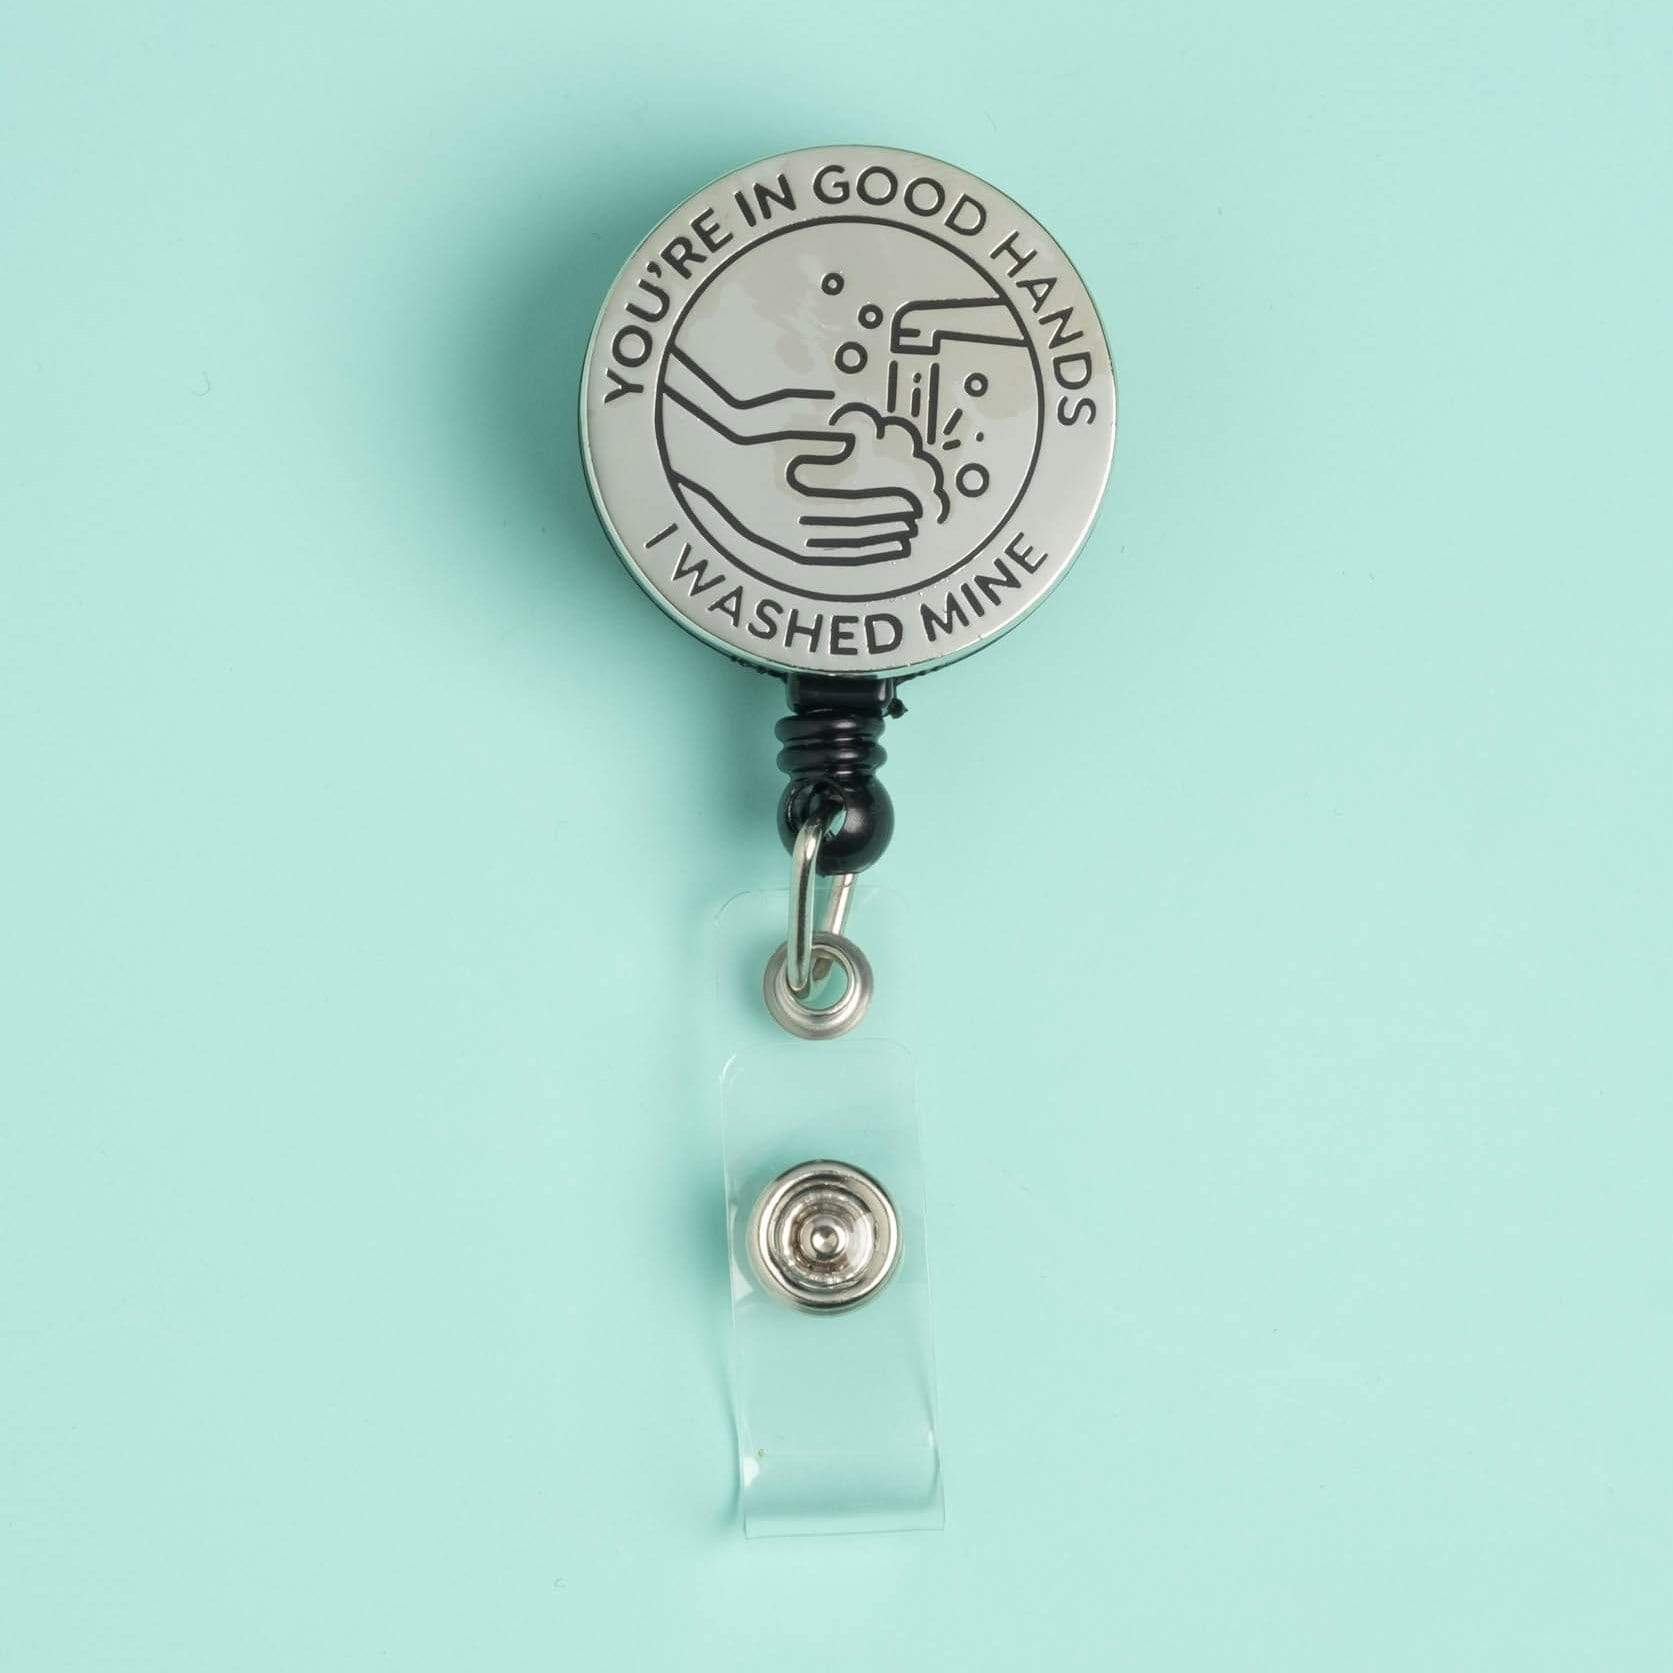 You're in Good Hands Badge Reel | Dissent Pins